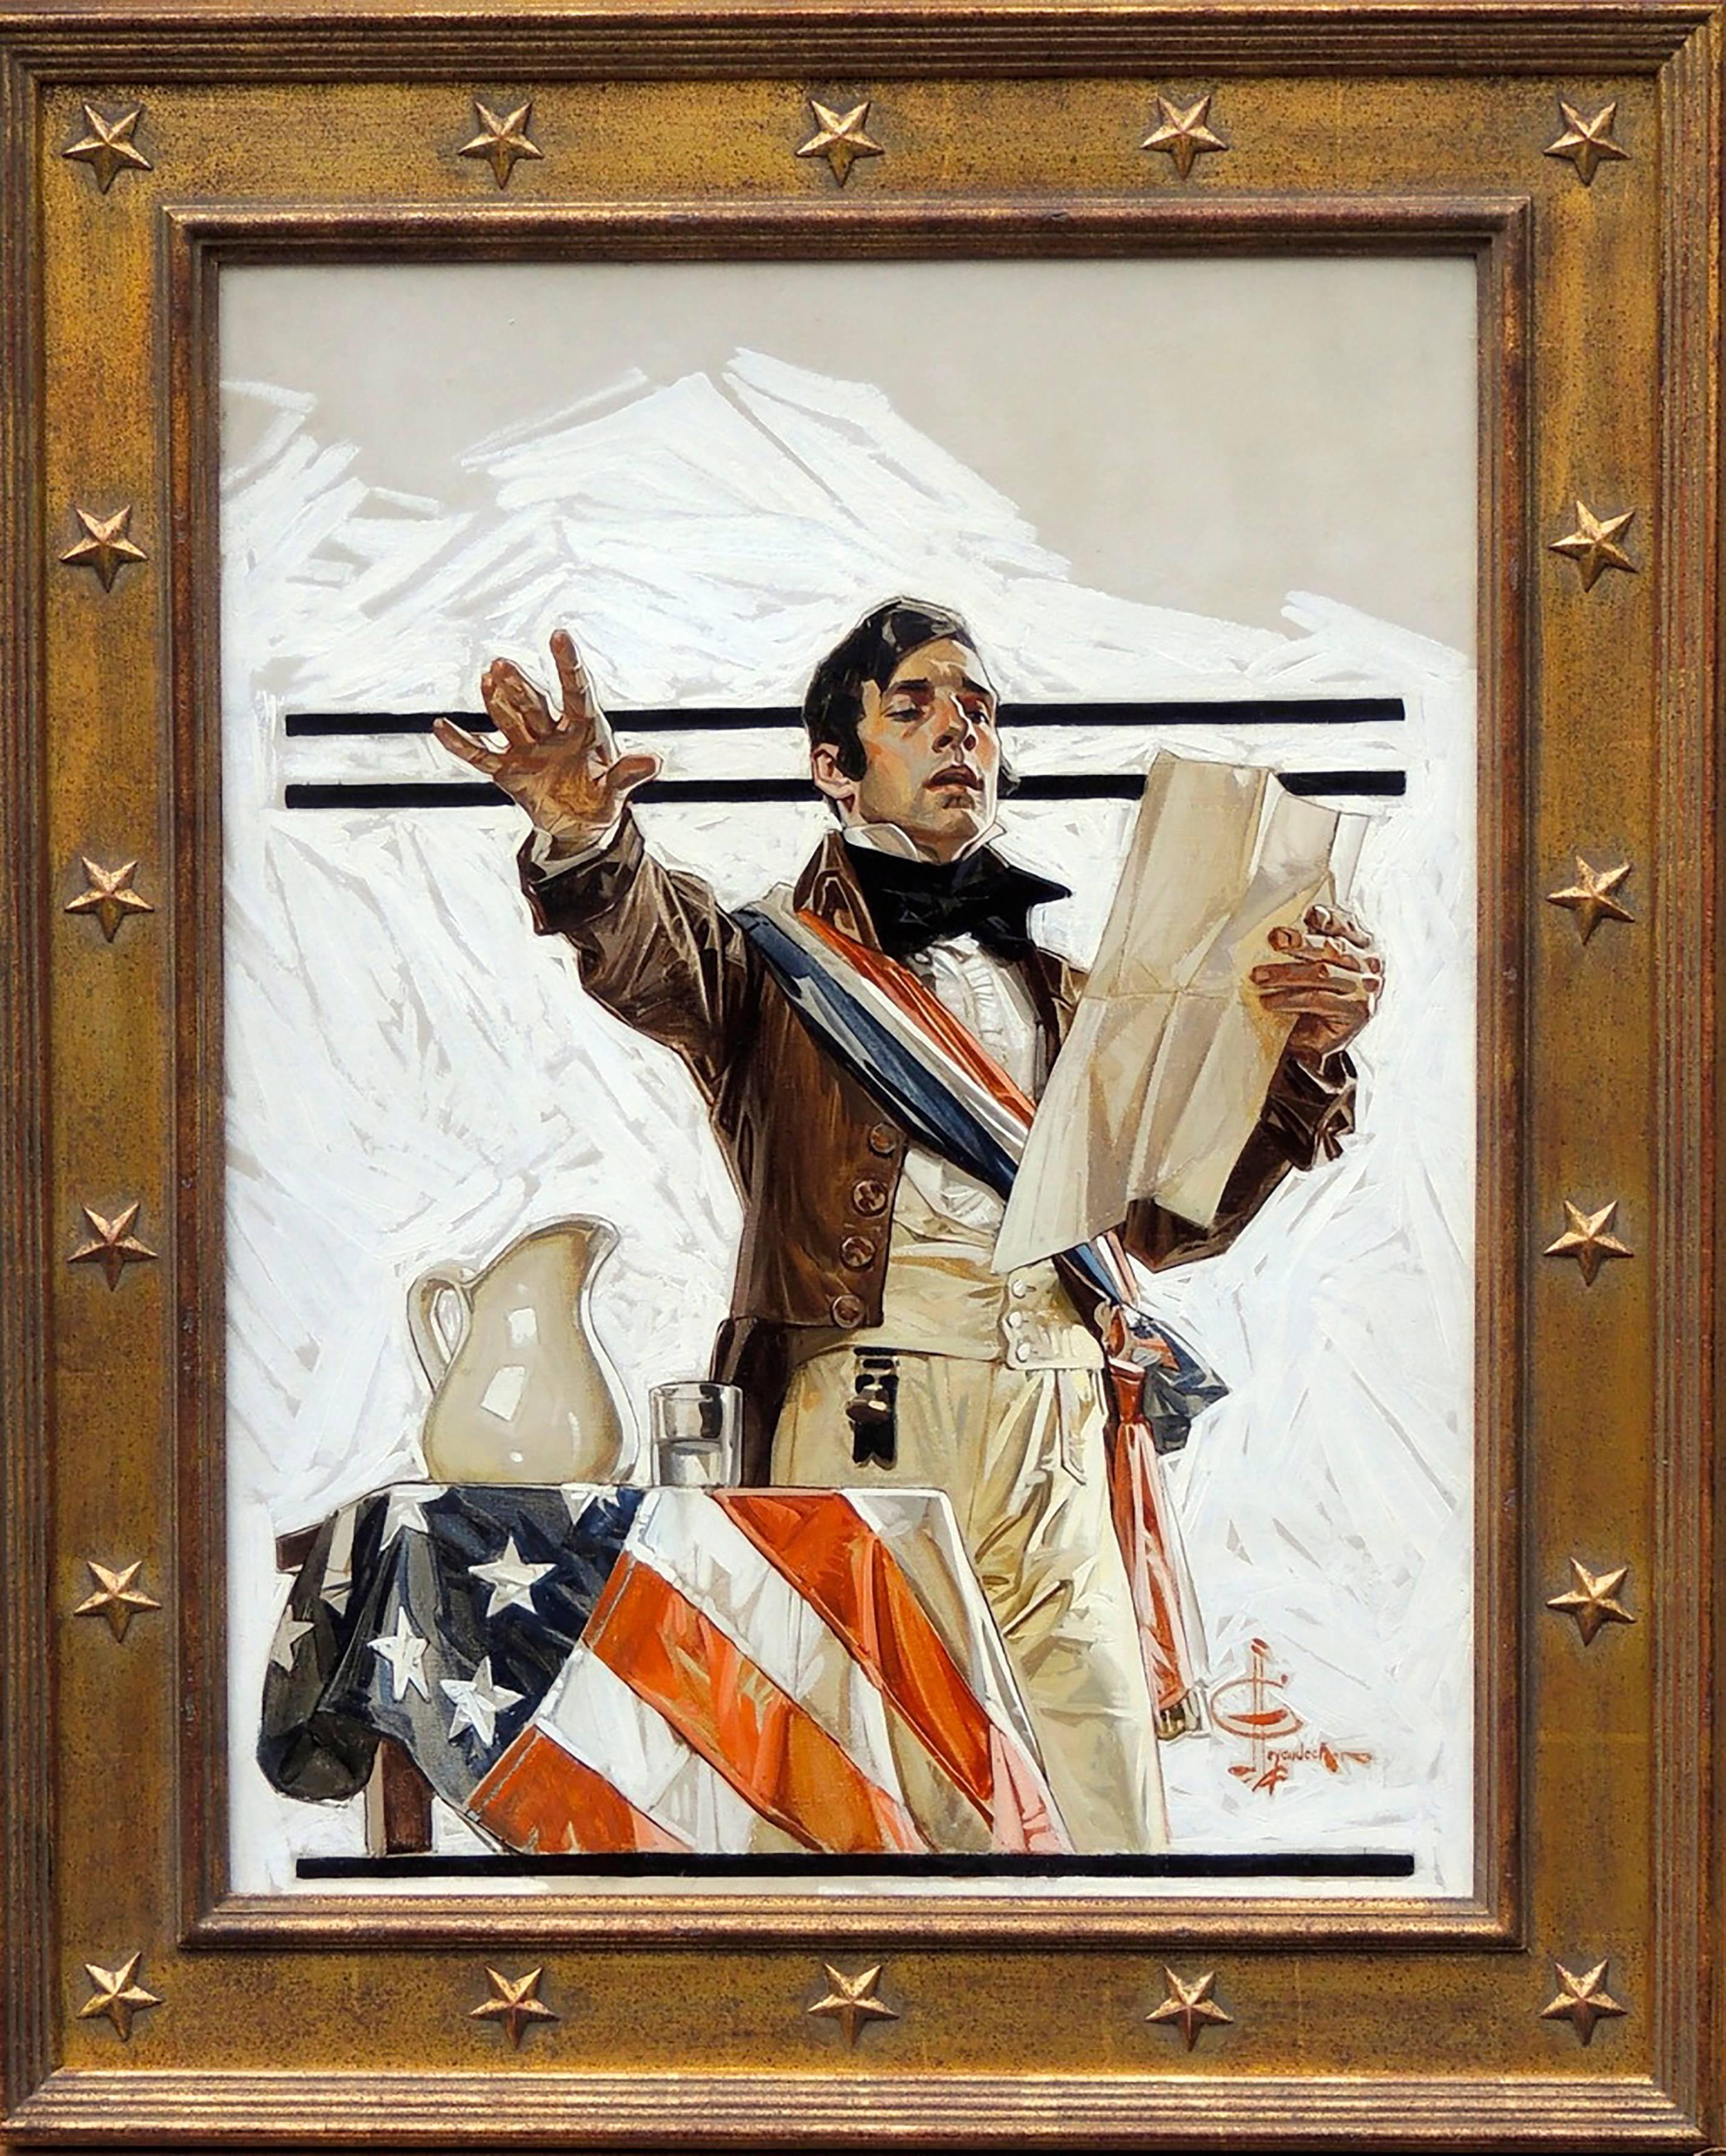 July 4th Edition, Saturday Evening Post Cover - Painting by Joseph Christian Leyendecker